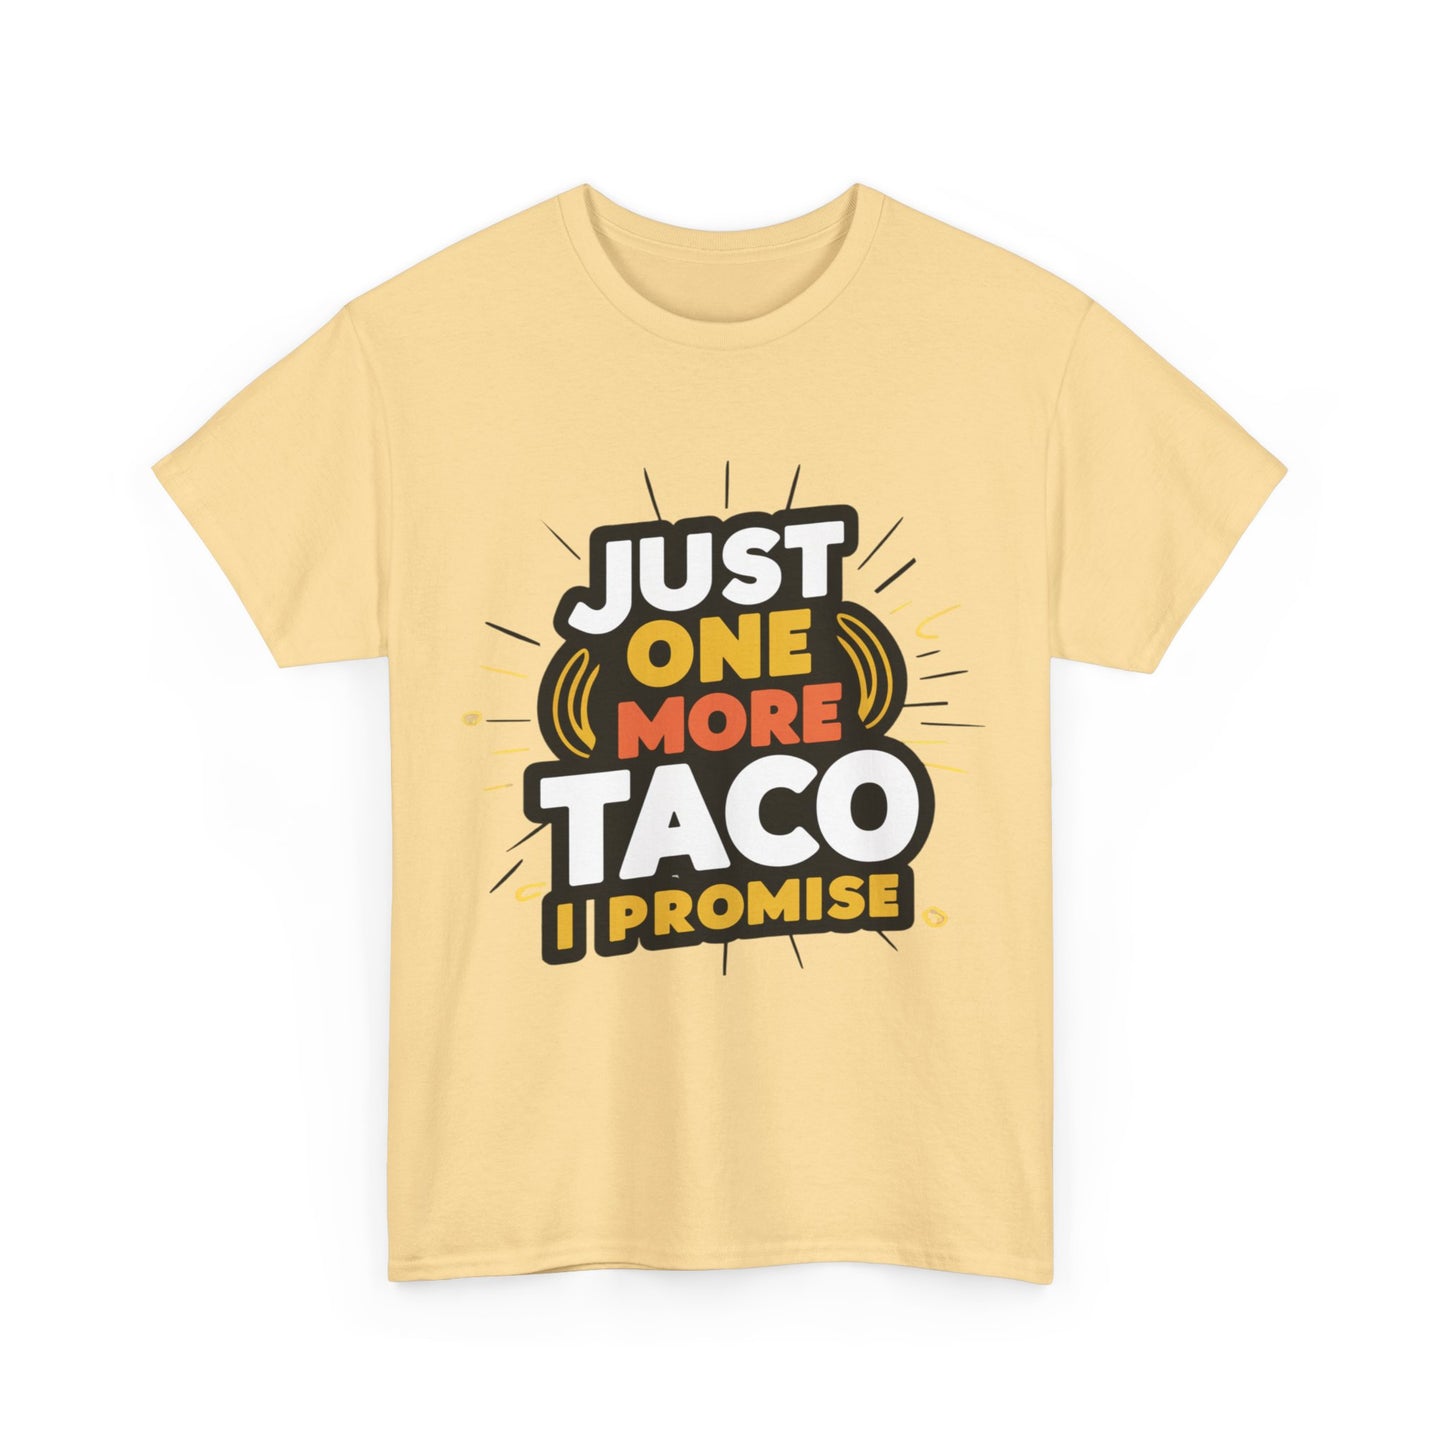 Just One More Taco I Promise Mexican Food Graphic Unisex Heavy Cotton Tee Cotton Funny Humorous Graphic Soft Premium Unisex Men Women Yellow Haze T-shirt Birthday Gift-45